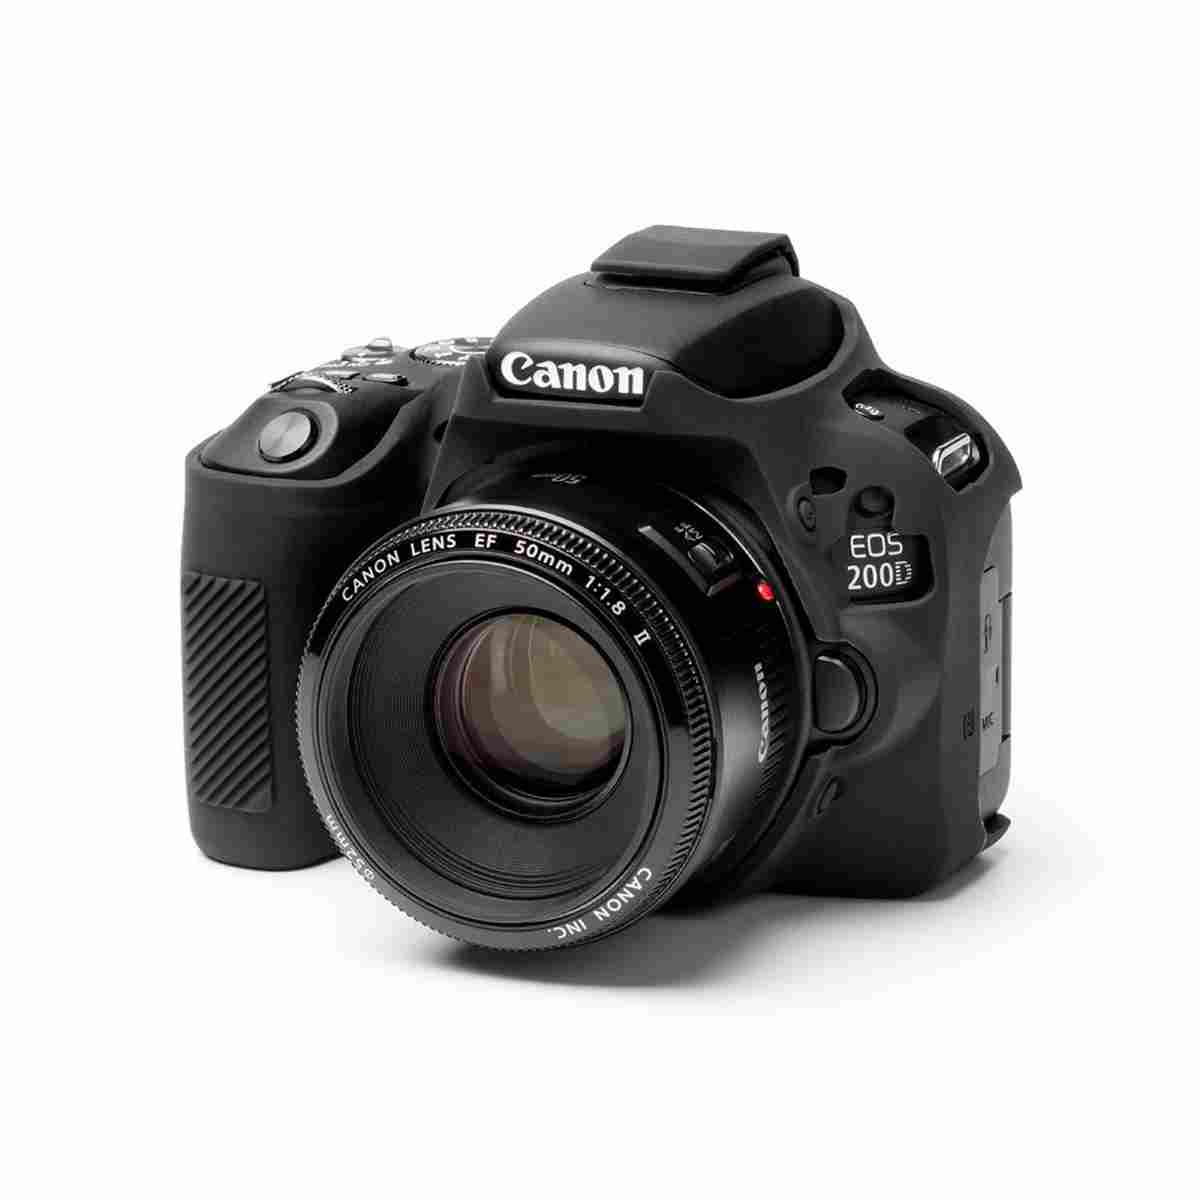 Walimex pro easyCover for Canon 200D / 250D